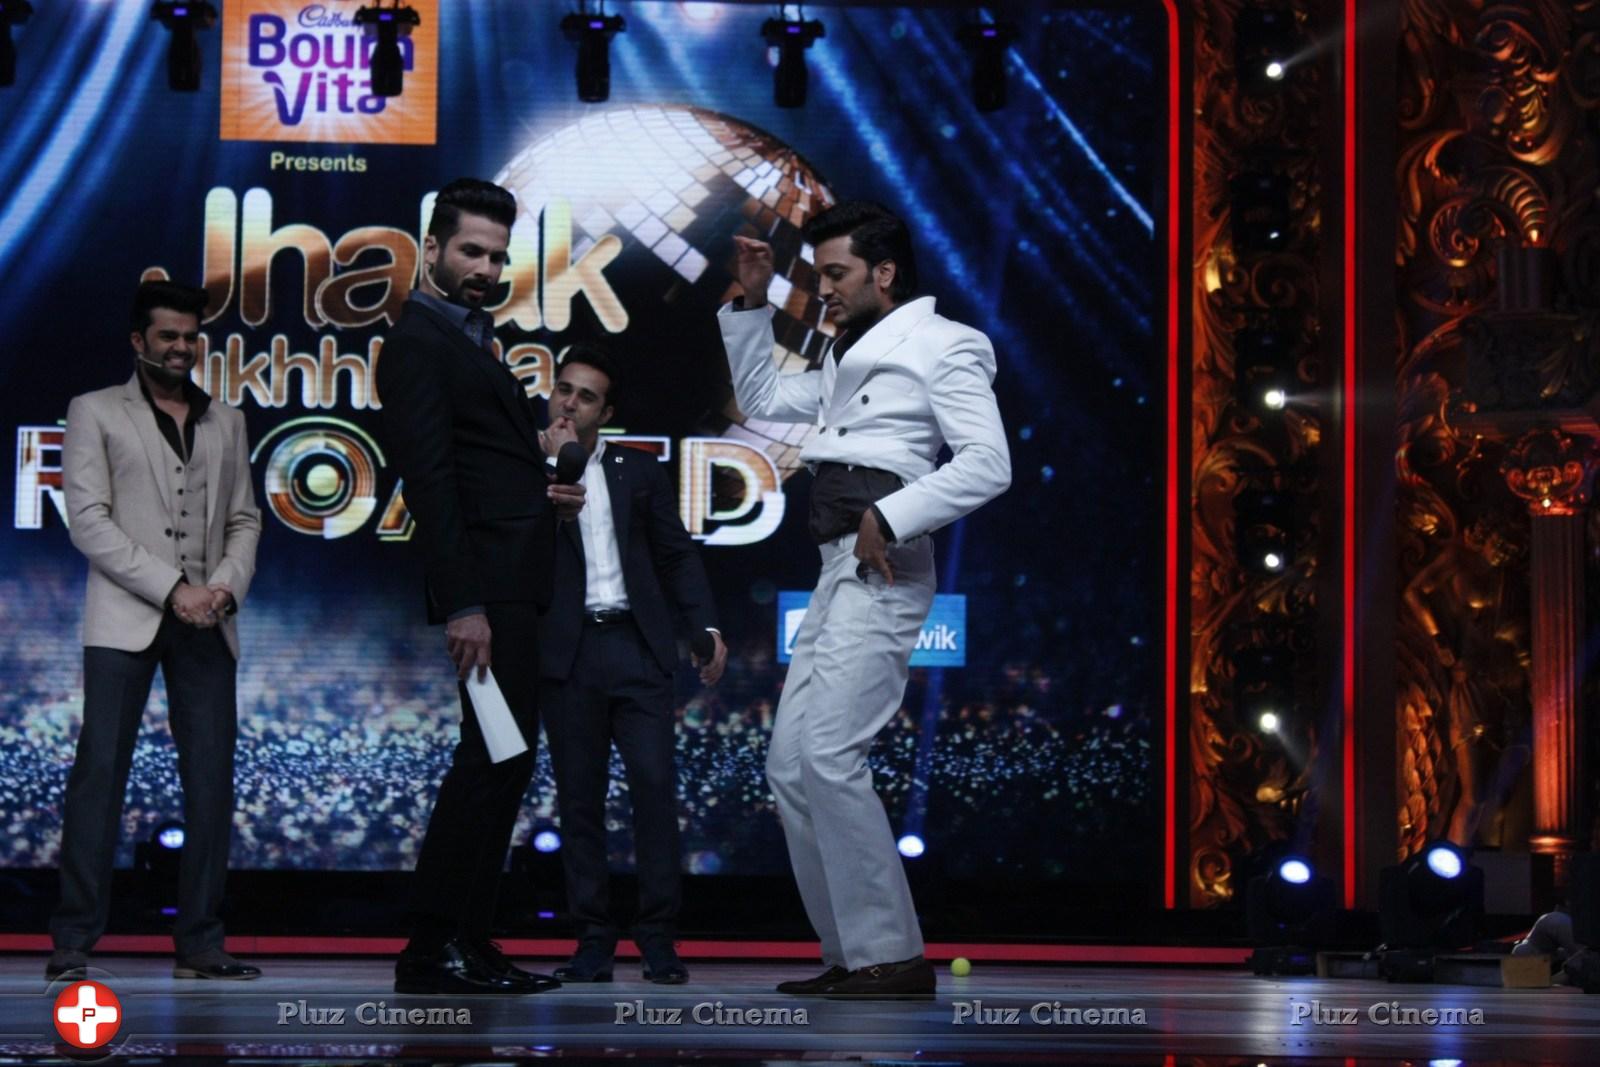 Film Bangistan Promotion On The Set Of Jhalak Reloaded With Judges Photos | Picture 1079551